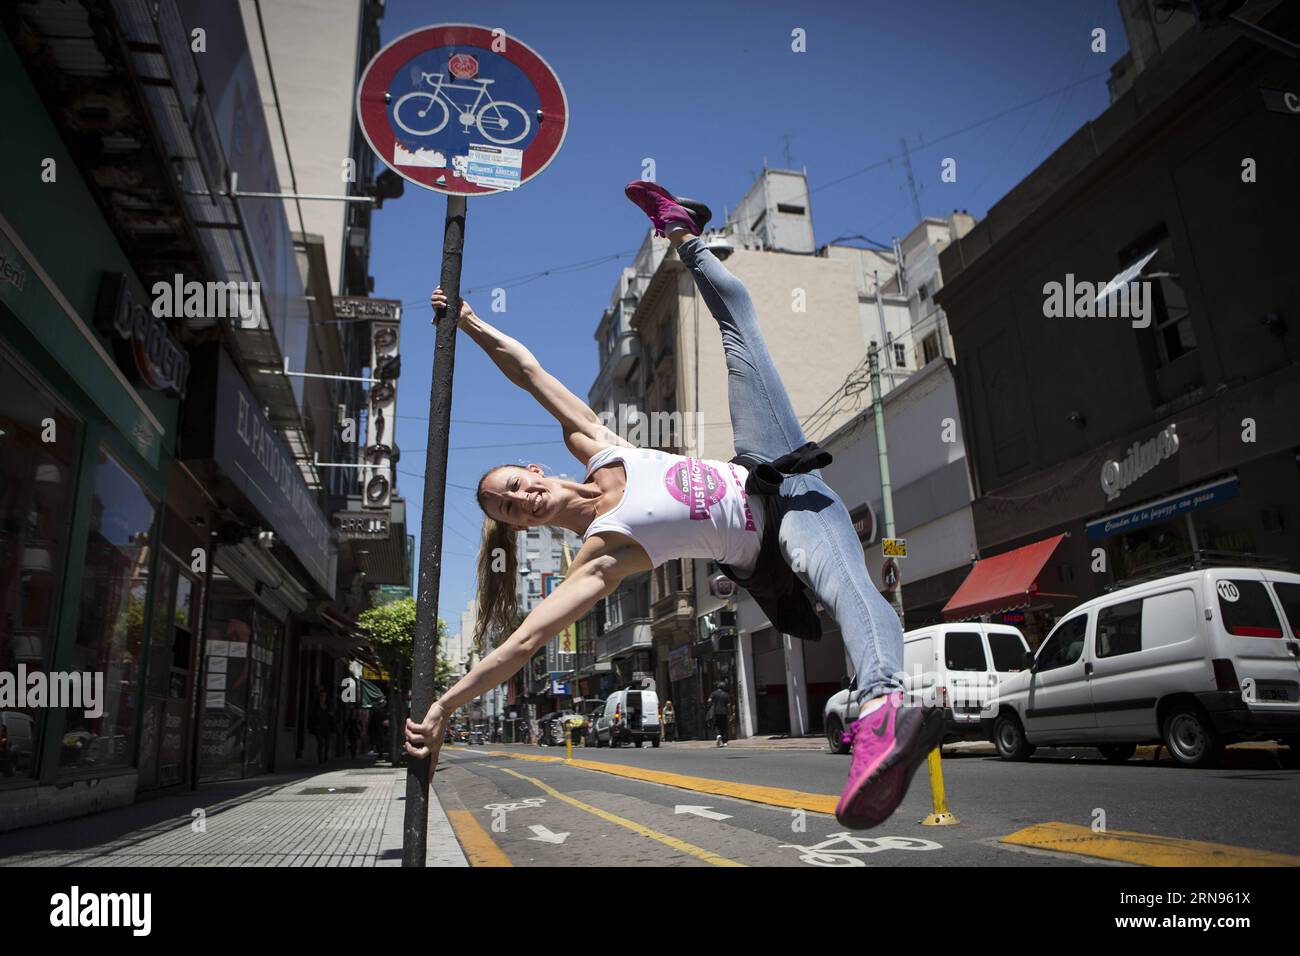 (151121) -- BUENOS AIRES, Nov. 20, 2015 -- A dancer performs a choreography of Pole Dance at Av. Corrientes in Buenos Aires, capital of Argentina, on Nov. 20, 2015. According to local press, the dancers prepare to compete in the event of Miss Pole Dance Argentina and South America that will take place on Nov. 23, with competitors from Argentina, Peru, Brazil, Bolivia, Paraguay, Chile, Ecuador, Colombia and Venezuela. Martin Zabala) (vf) (sp) ARGENTINA-BUENOS AIRES-SOCIETY-POLE DANCE e MARTINxZABALA PUBLICATIONxNOTxINxCHN   151121 Buenos Aires Nov 20 2015 a Dancer performs a choreography of Pol Stock Photo